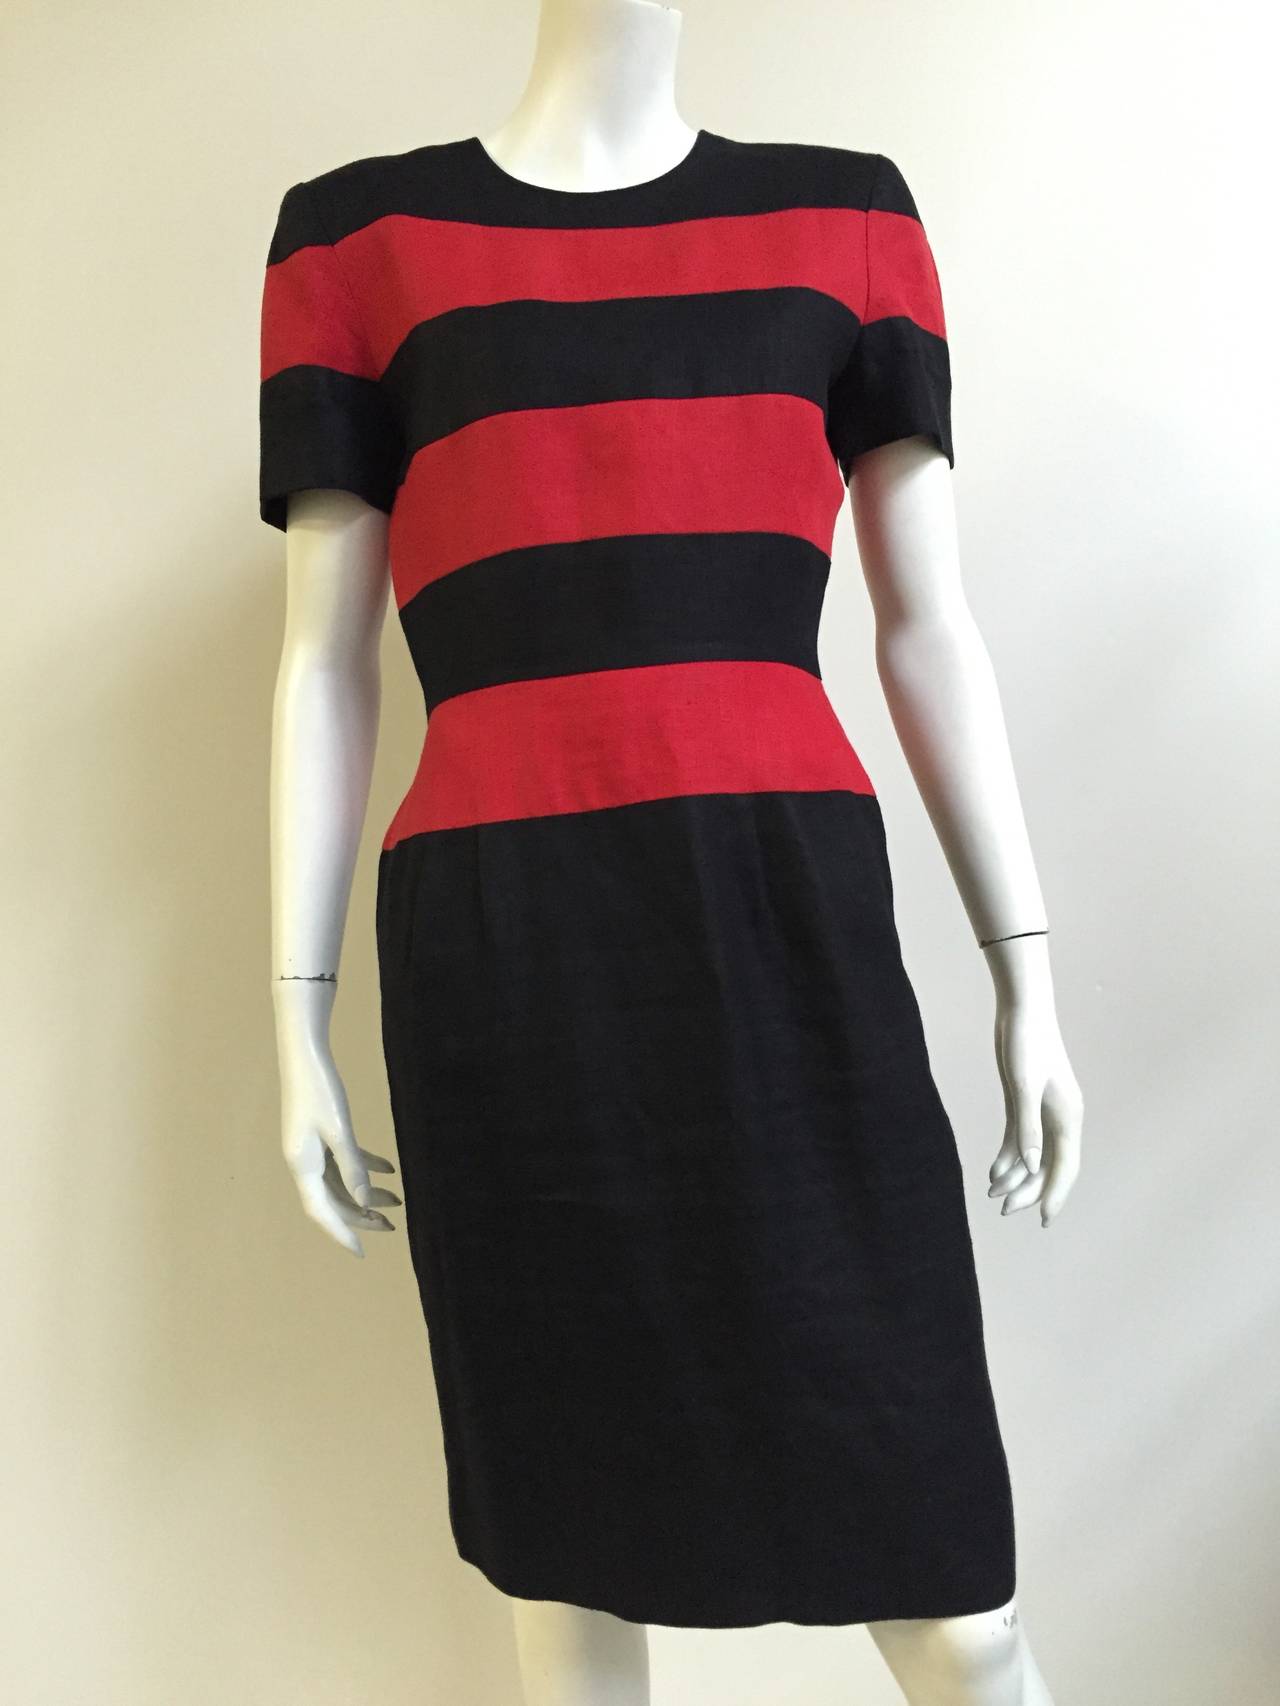 Arnold Scaasi 1980s linen black / red striped sheath dress size 6.  Ladies please grab your tape measure so you can measure your bust, waist & hips to make certain this gorgeous treasure will fit your lovely body.  Classic & timeless Scaasi